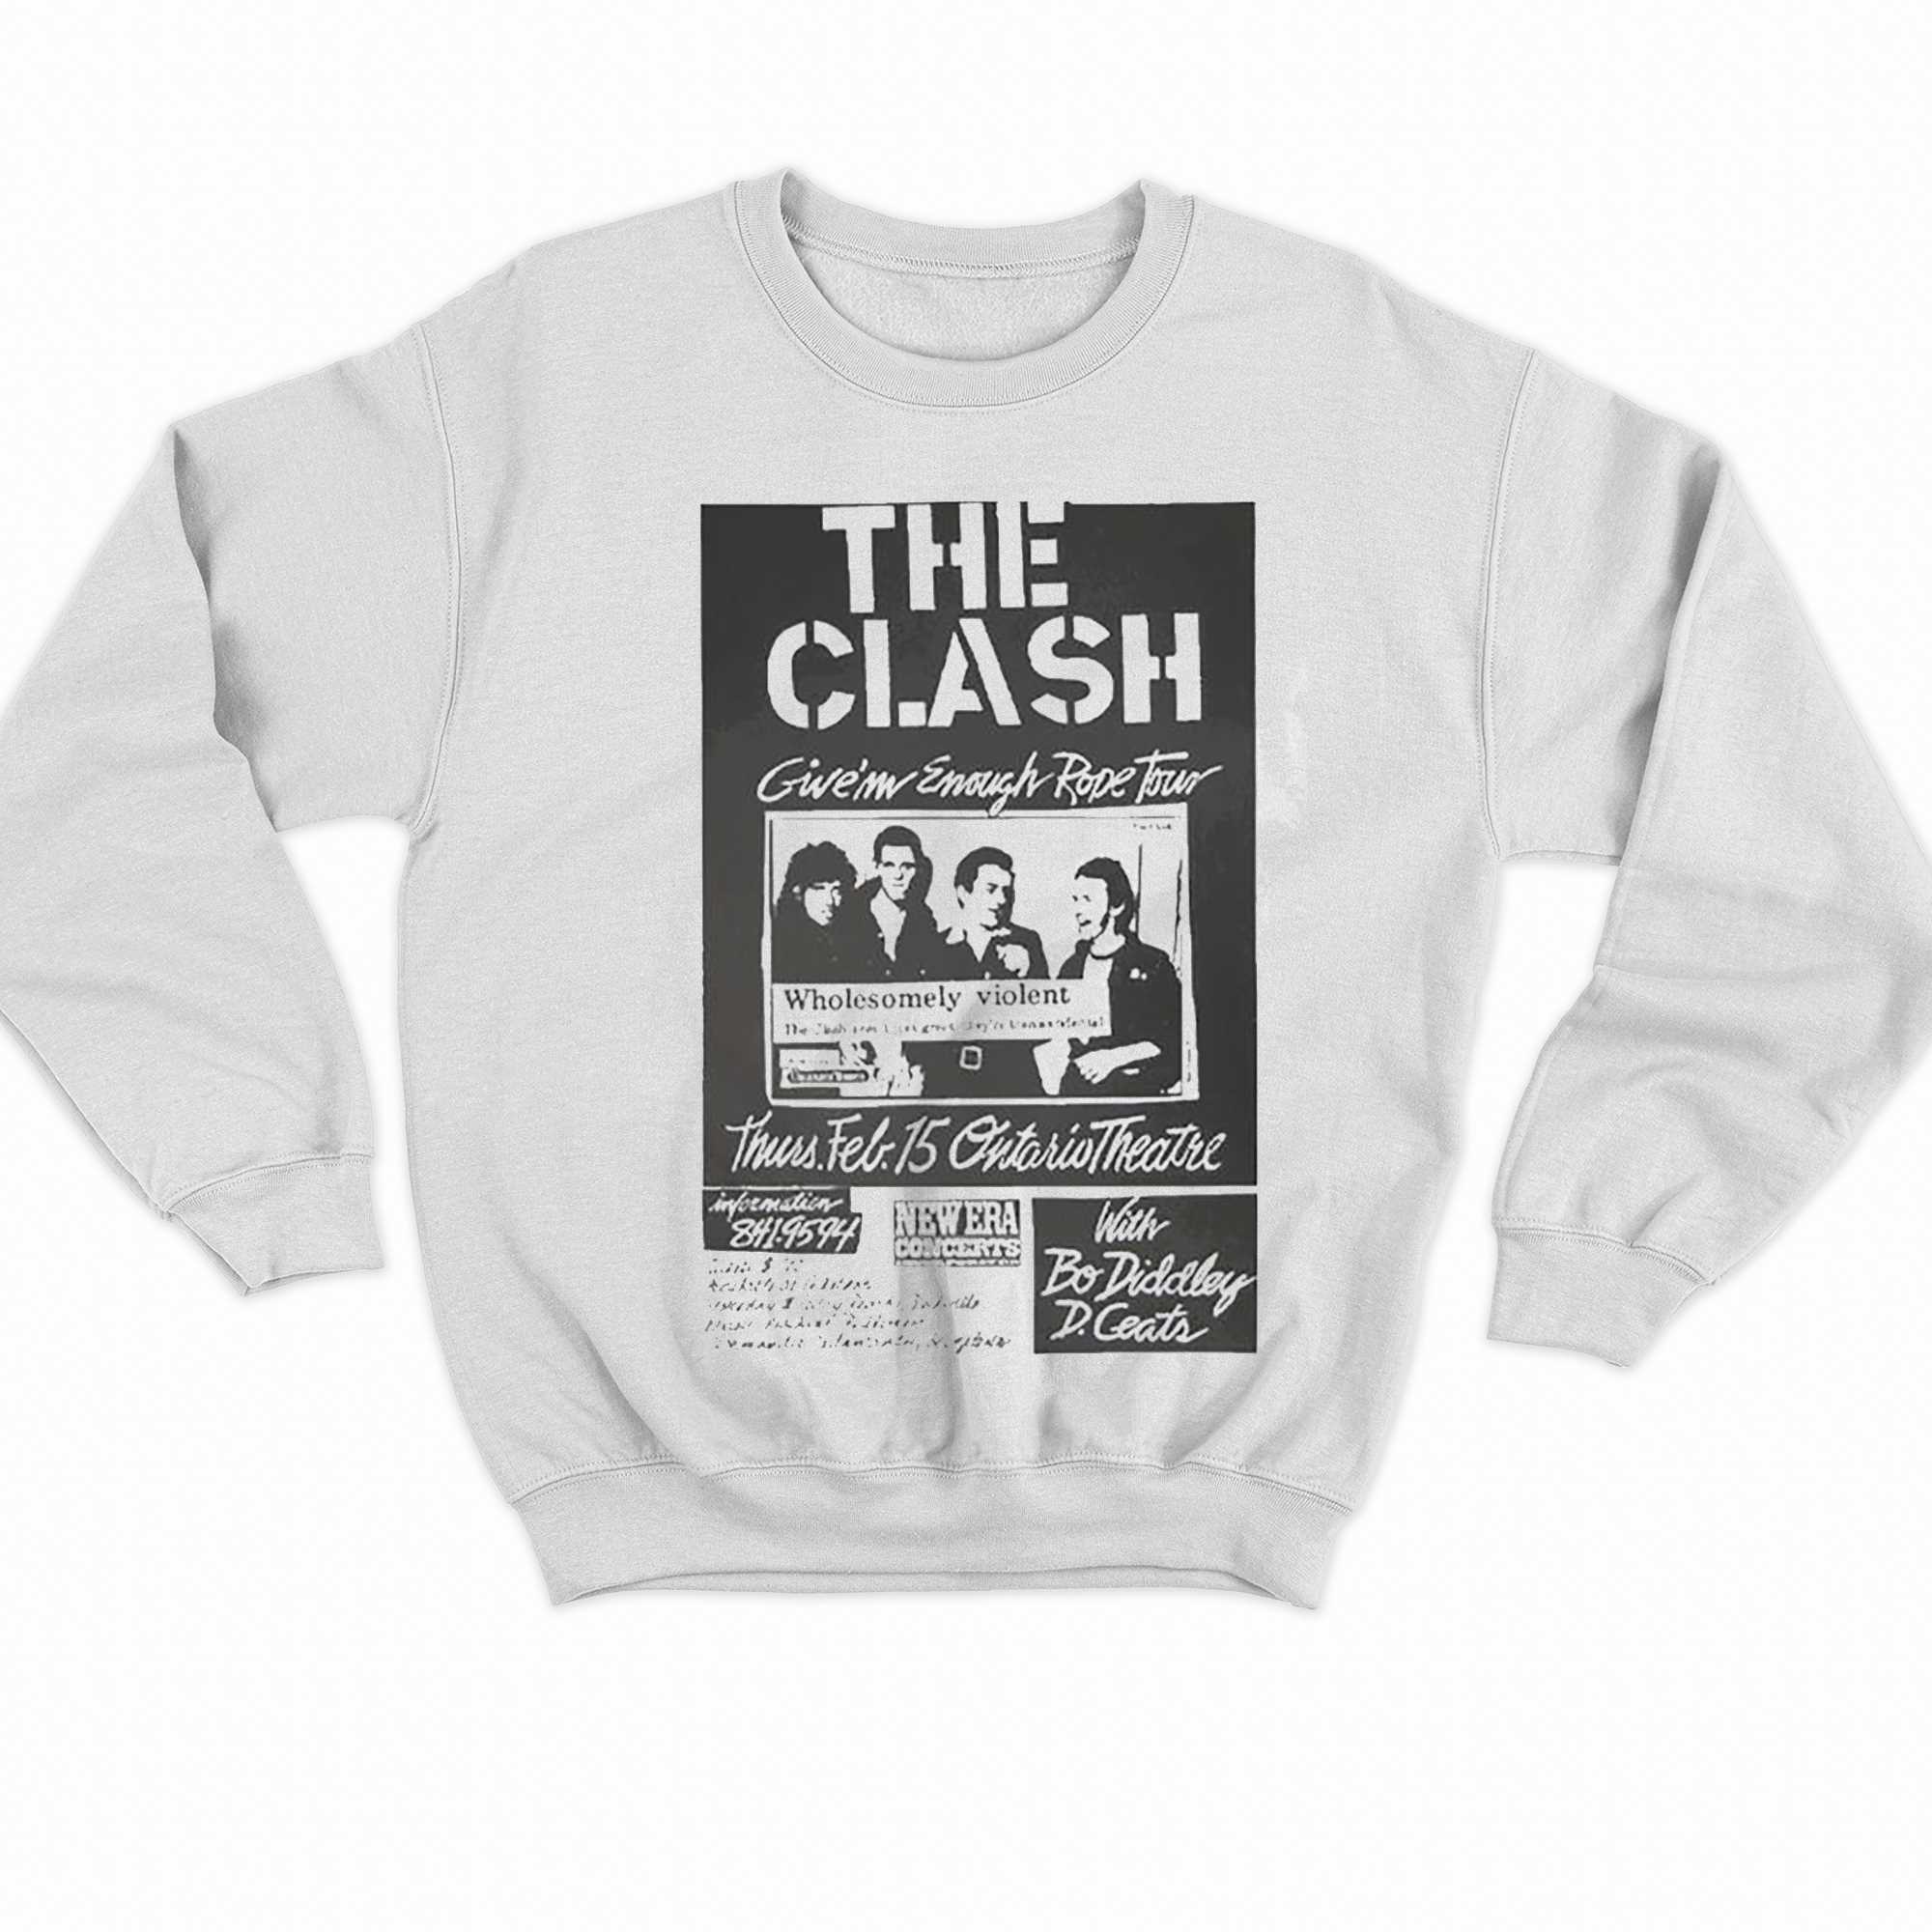 Wholesomely Violent The Clash Band Shirt 